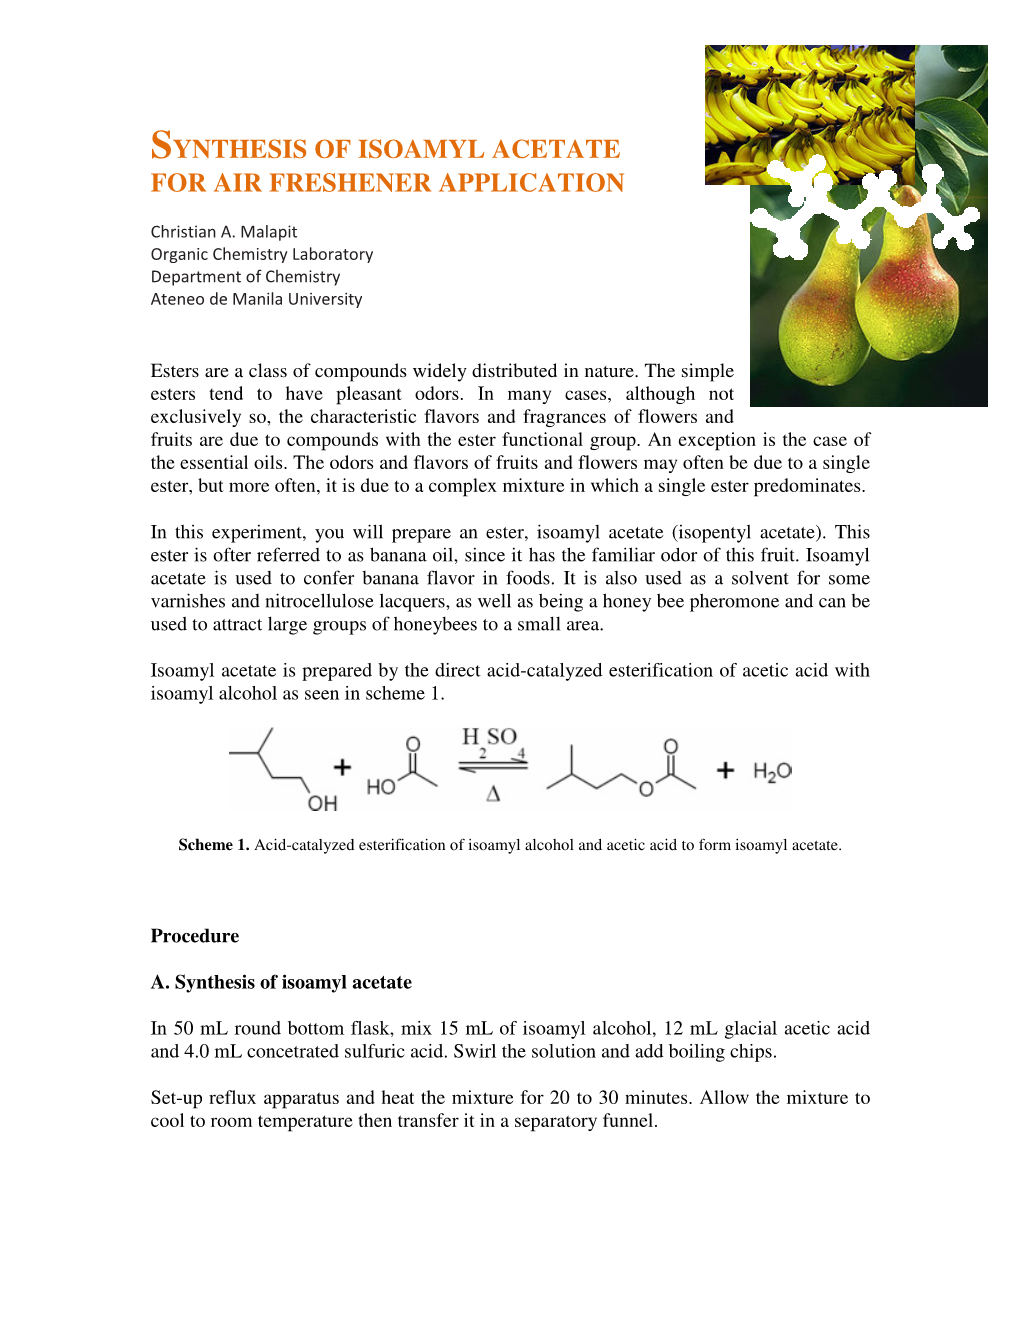 Synthesis of Isoamyl Acetate for Air Freshener Application